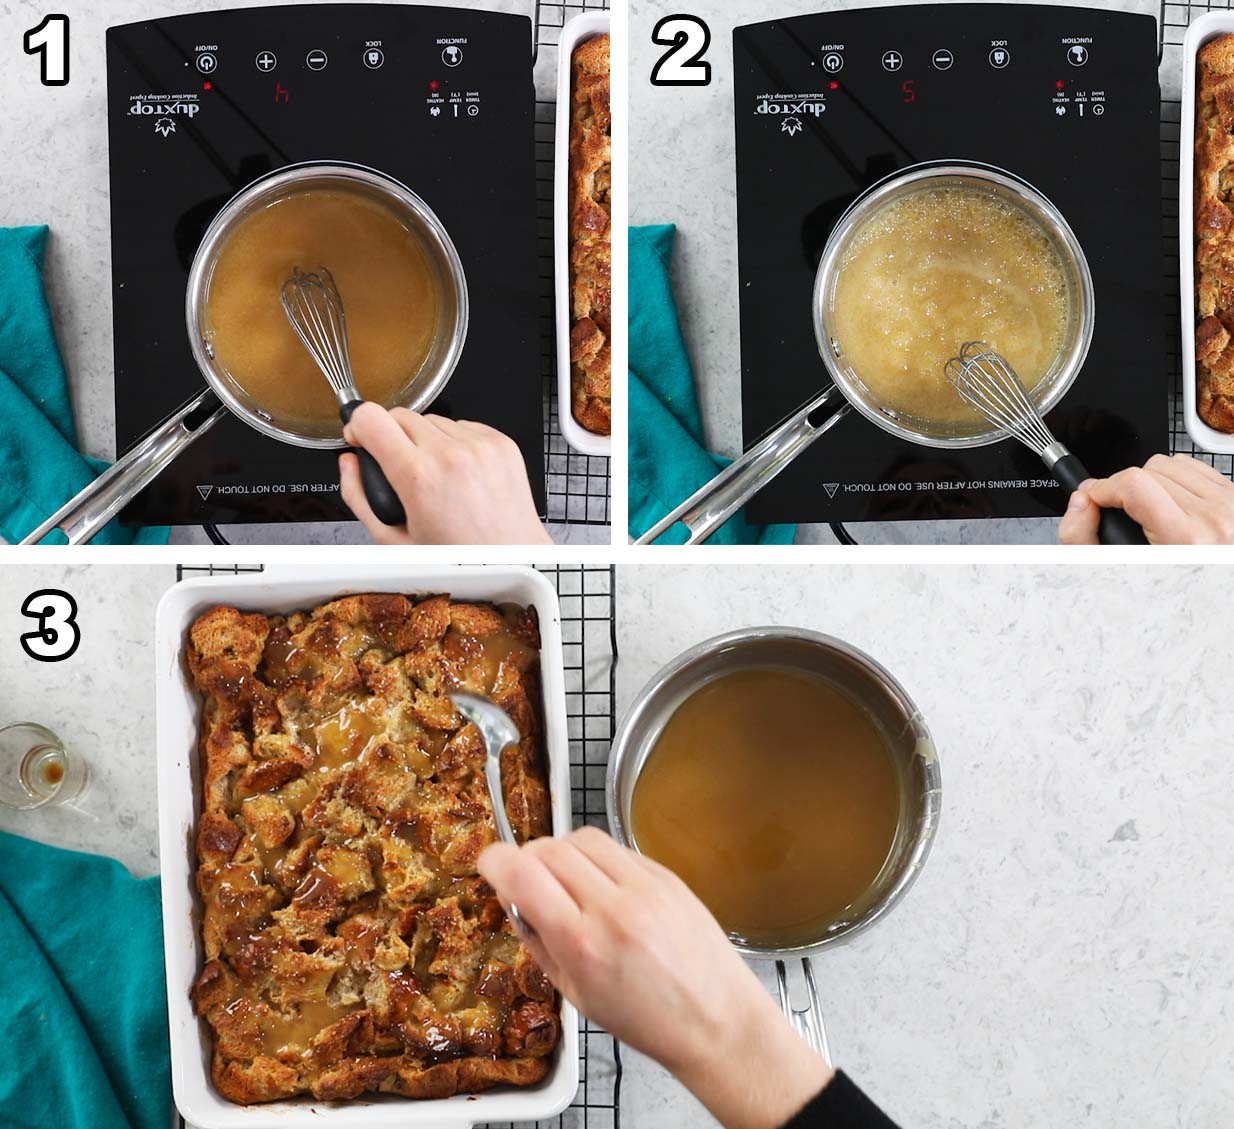 Three photos showing a sauce being prepared and drizzled over bread pudding.